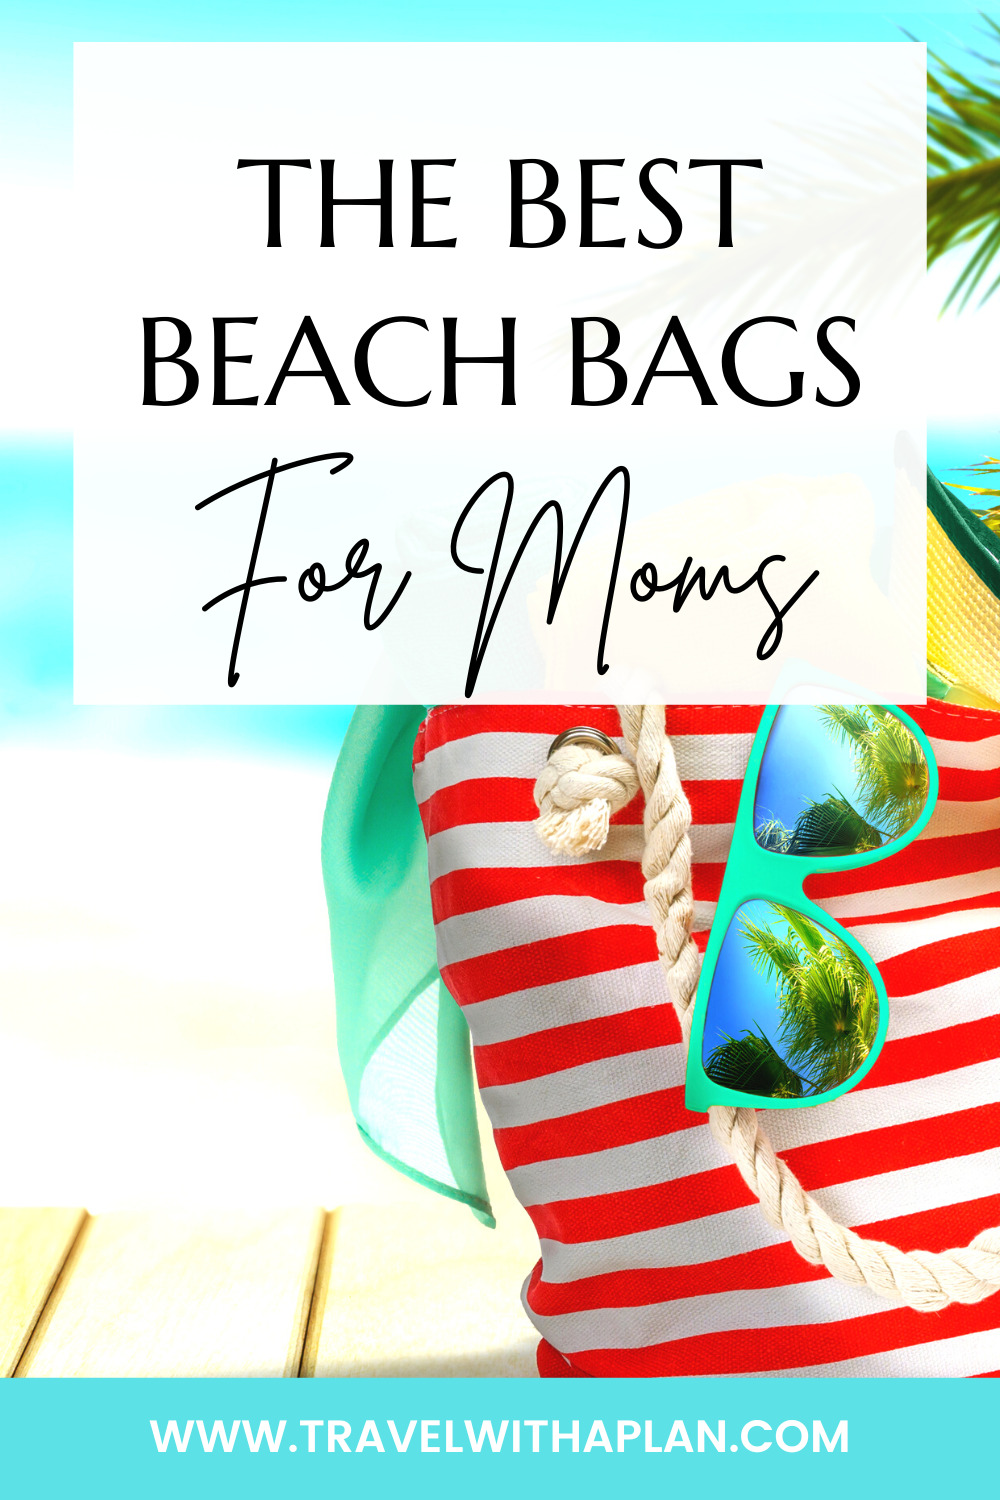 Get our list of the best beach bags for moms from top U.S. family travel blog, Travel With A Plan!